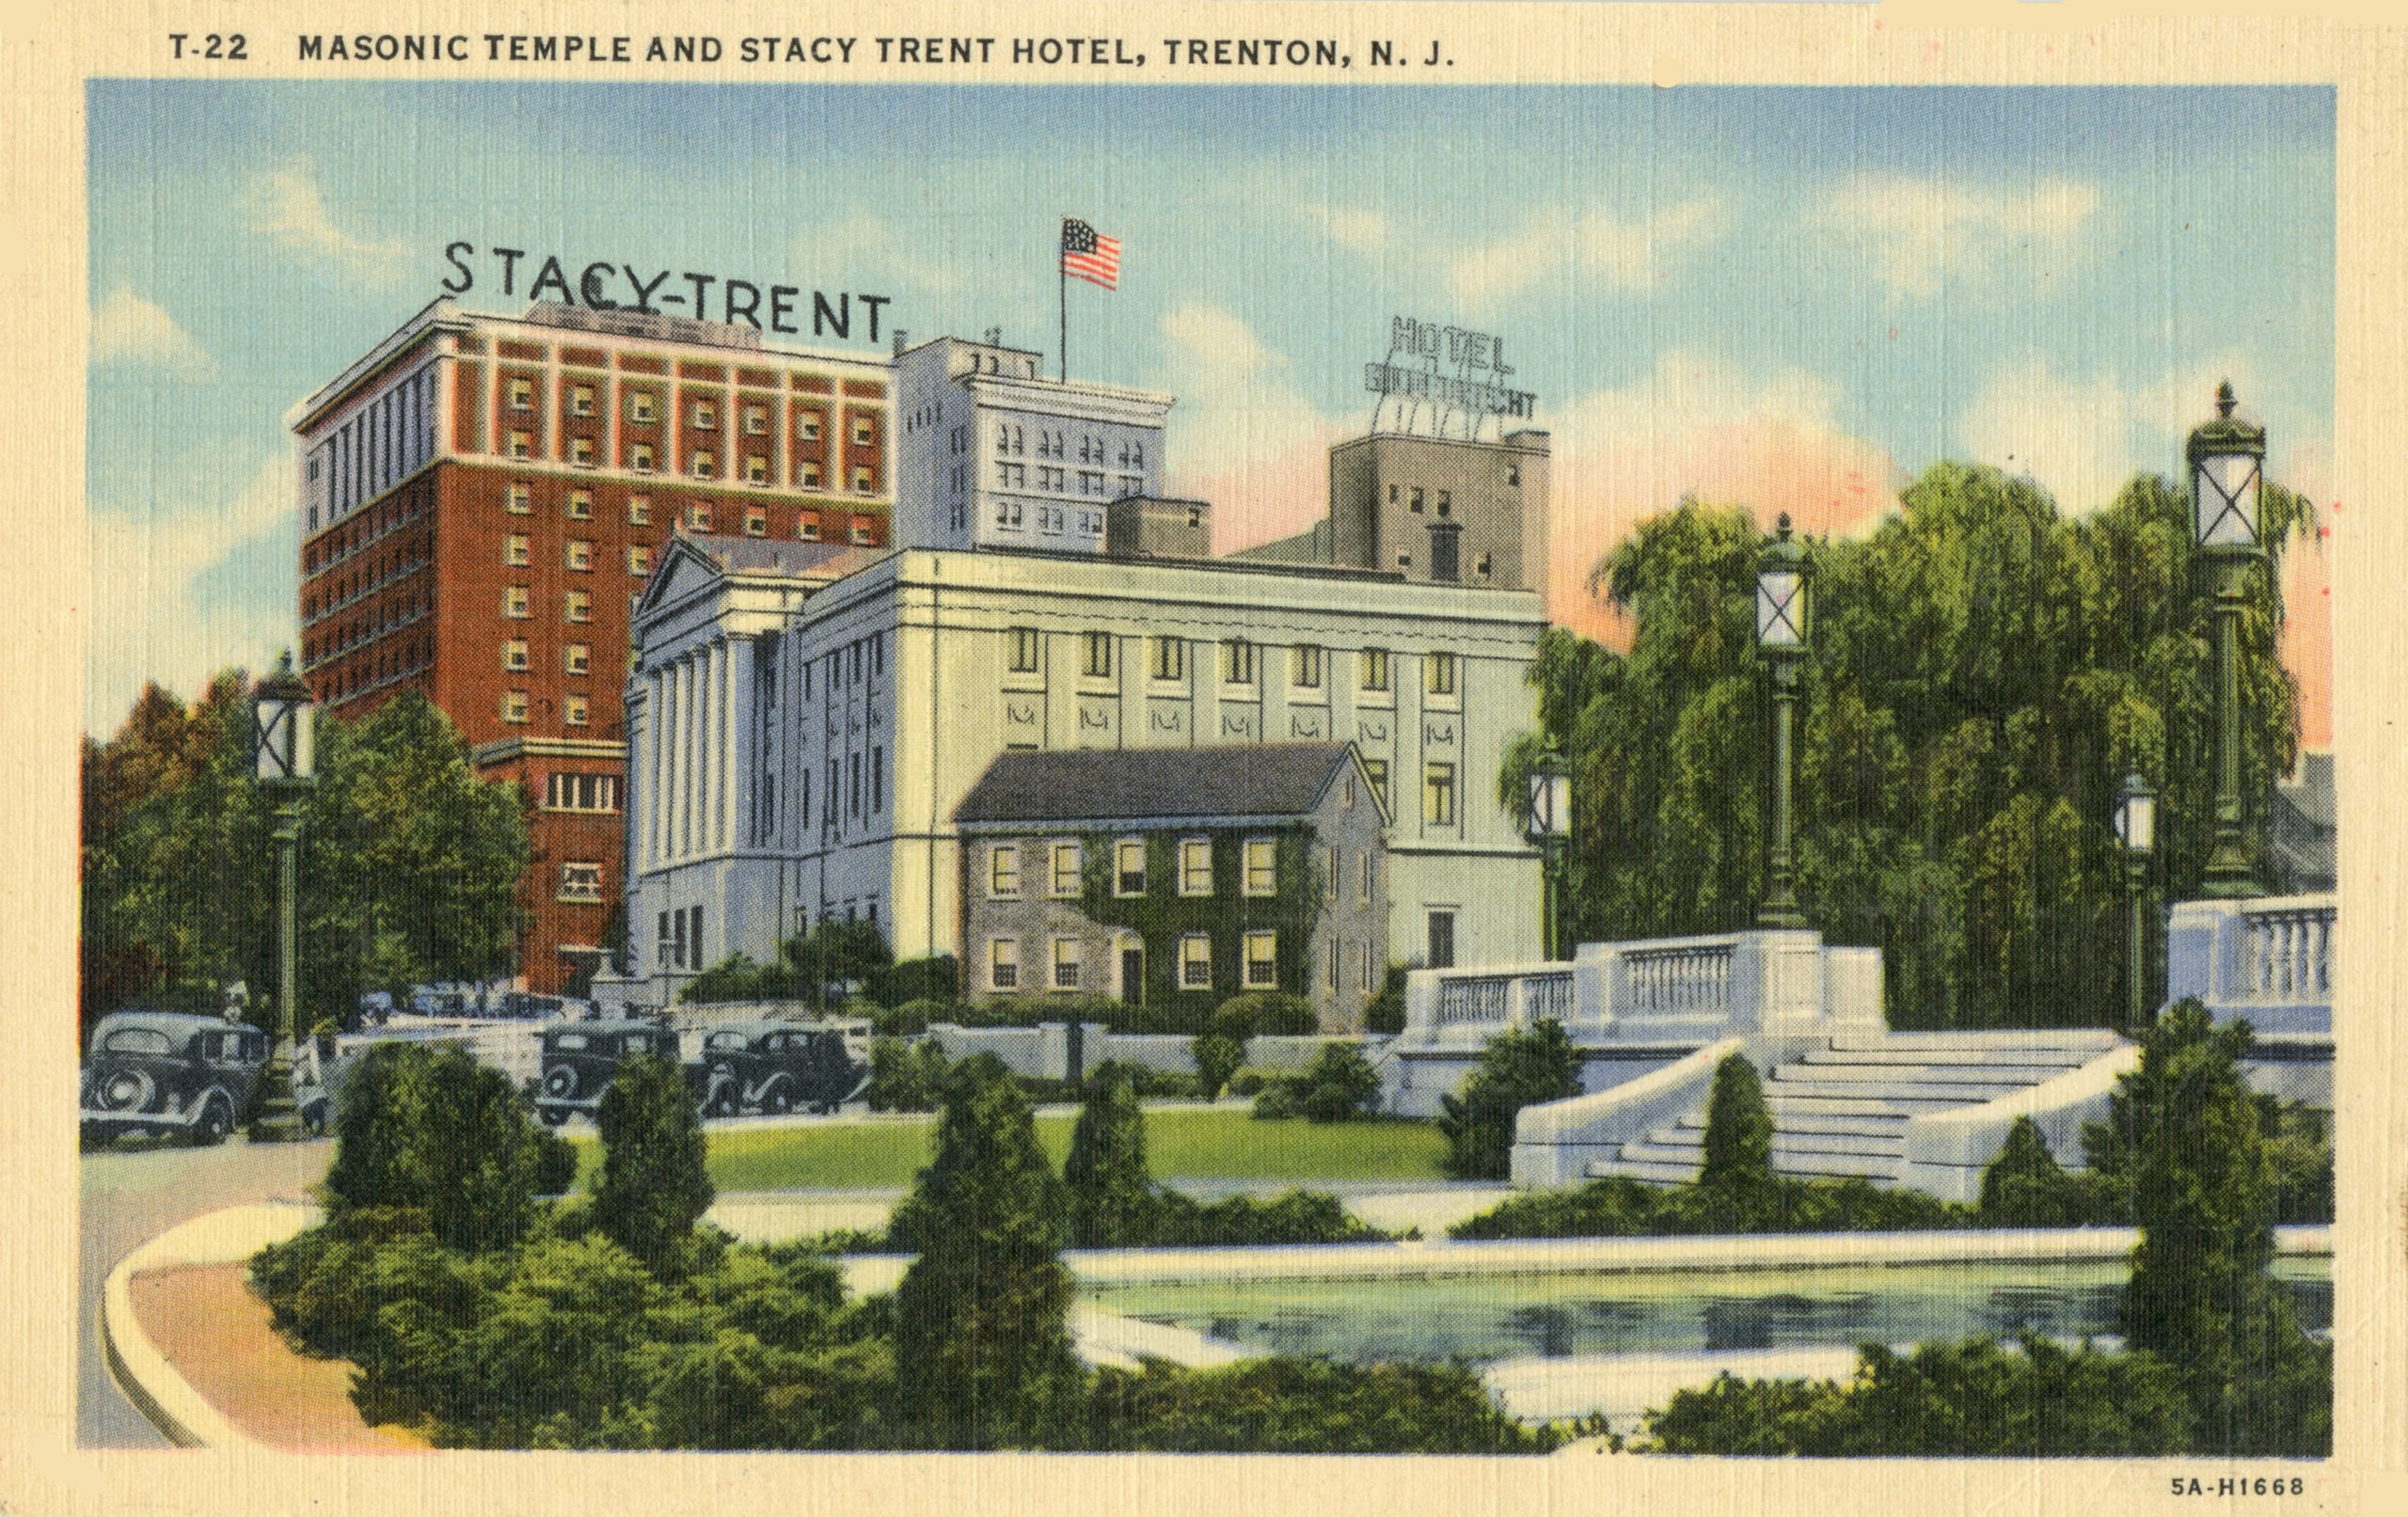 This Week in History: Exploring the Stacy-Trent Hotel